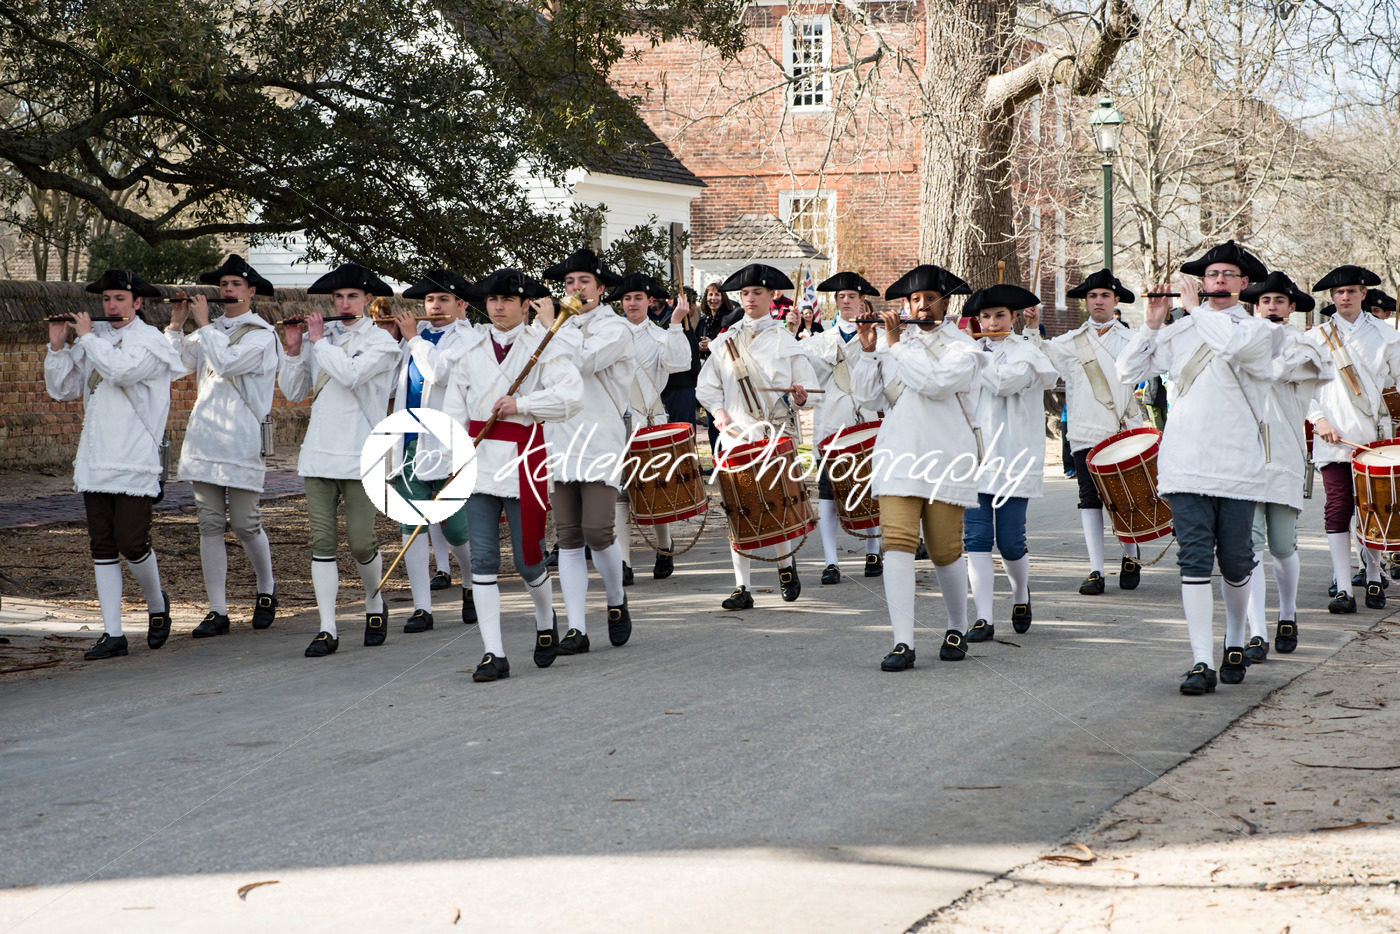 Williamsburg, Virgina – March 26, 2018: Reenactment marching band Fife and drum at Colonial WIlliamsburg. - Kelleher Photography Store